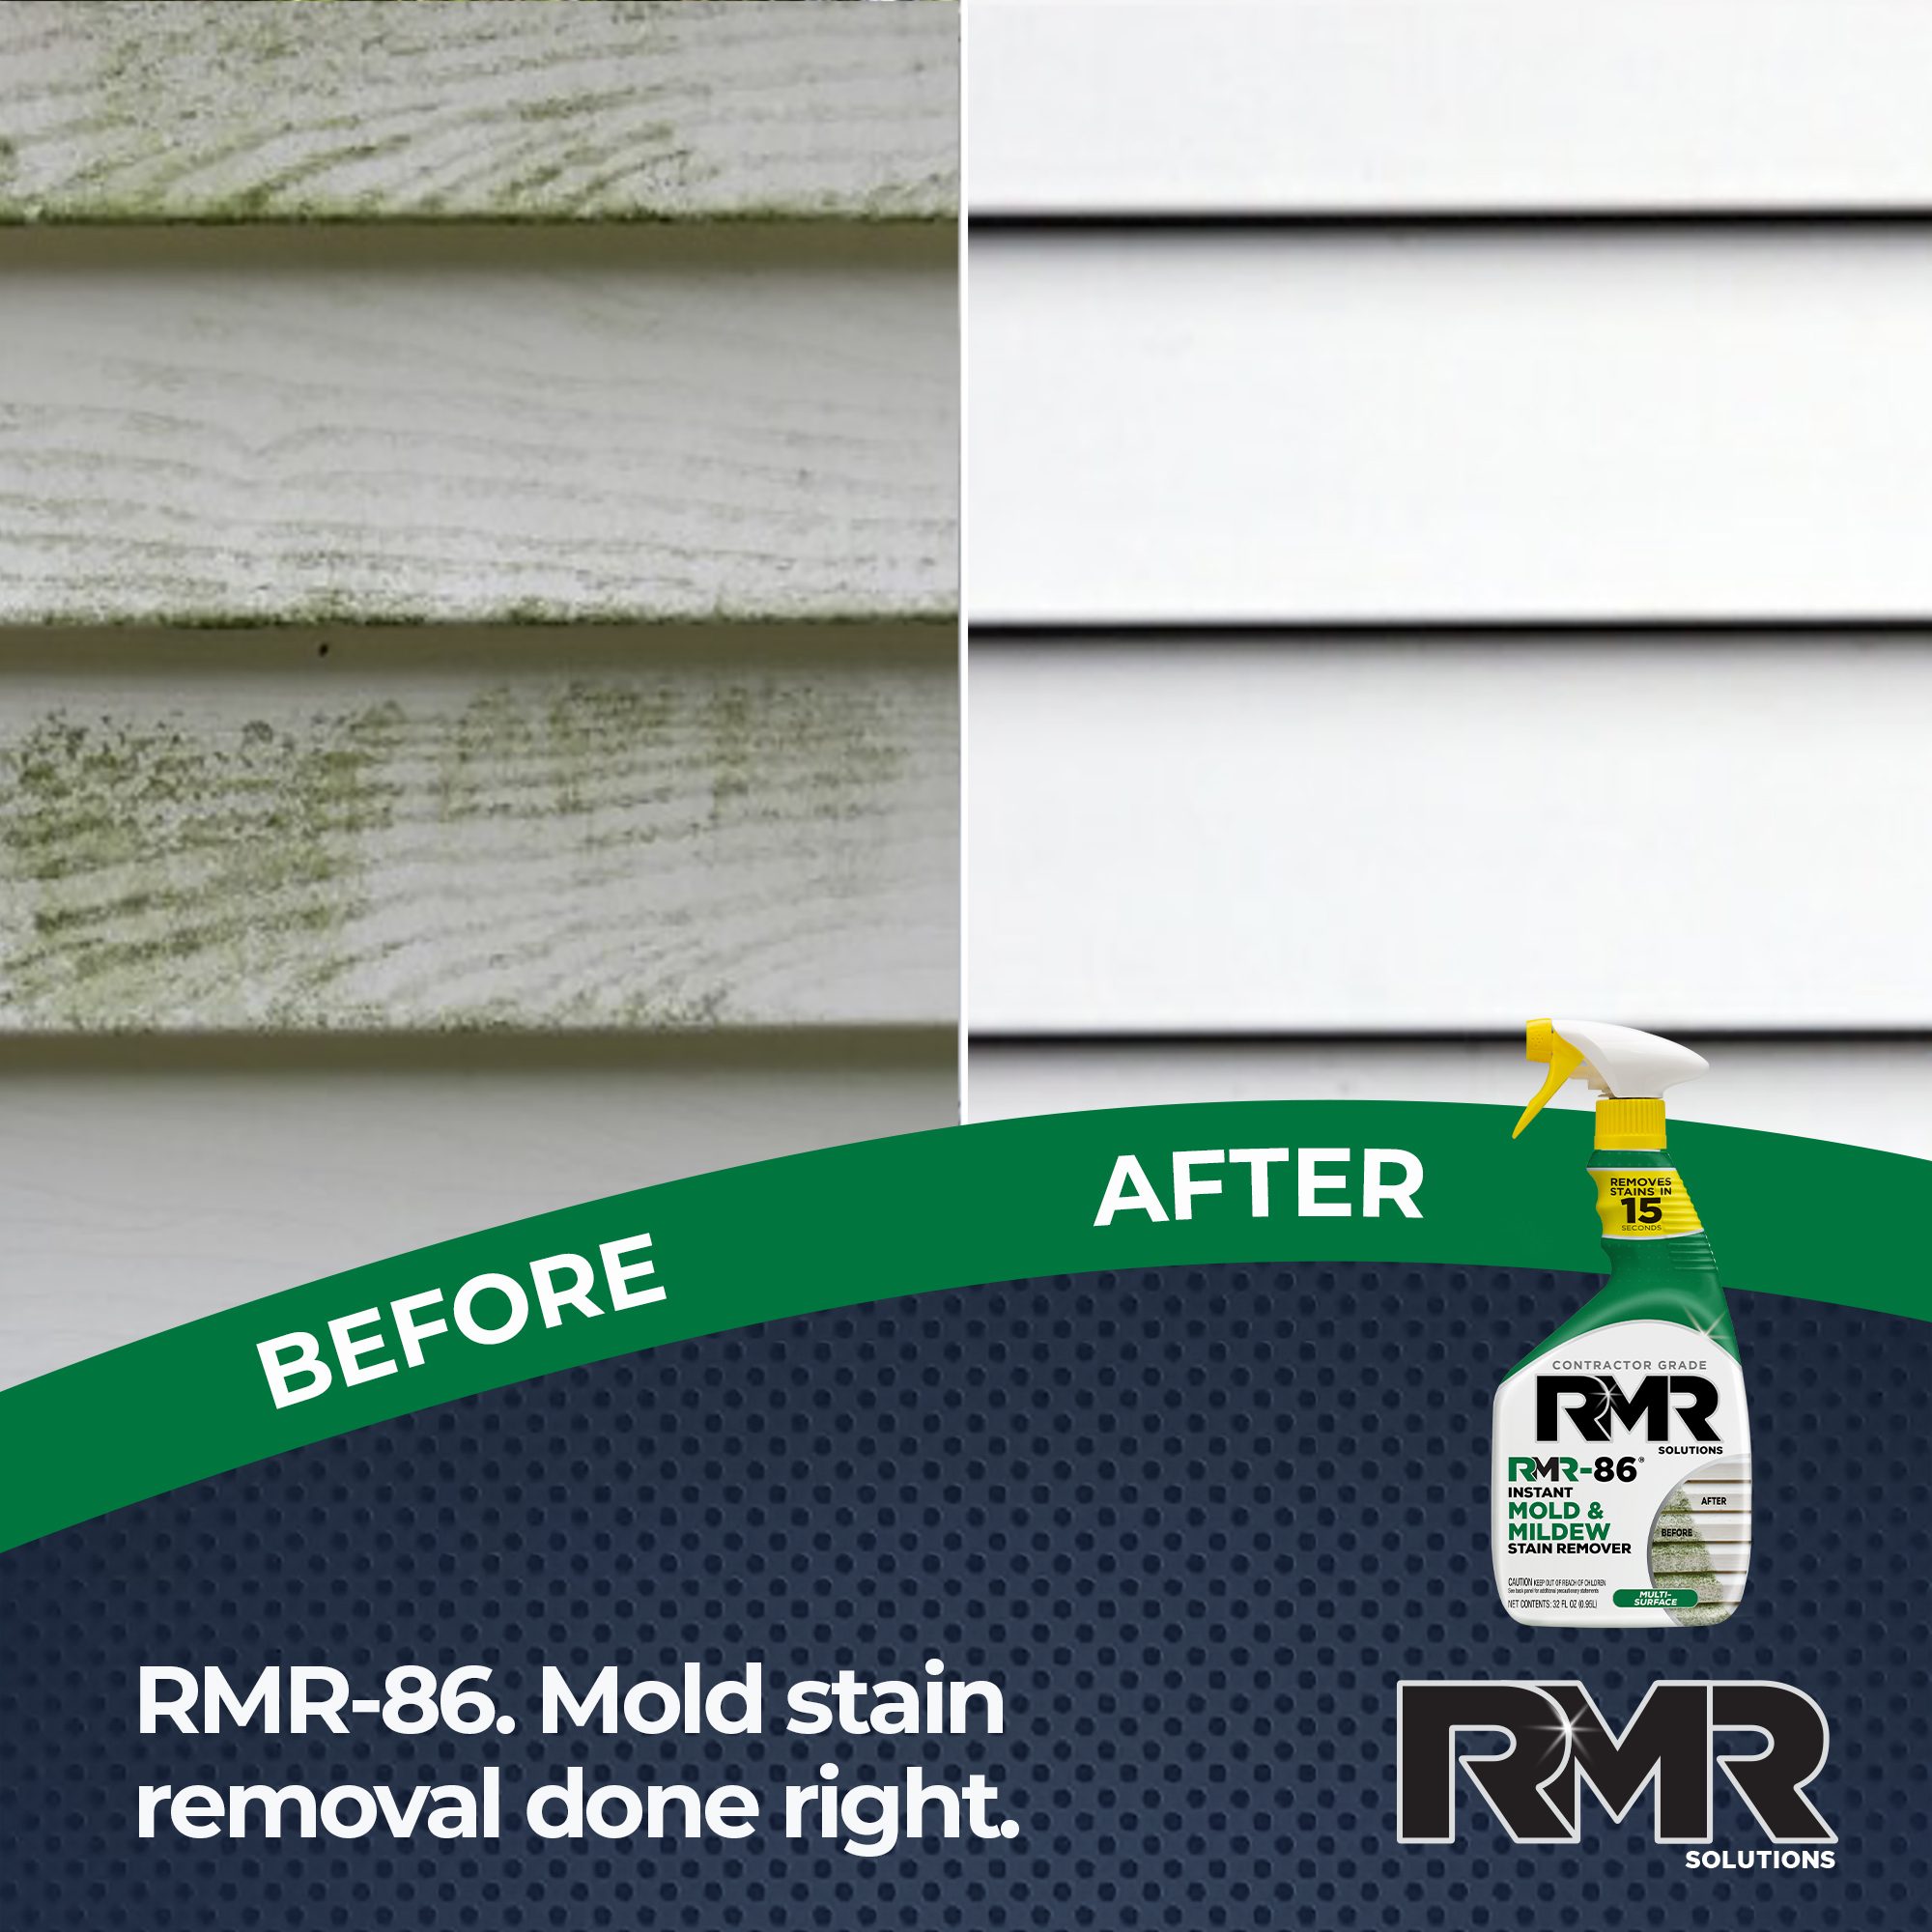 RMR-86 Instant Mold and Mildew Stain Remover, 32 Fl Oz - image 4 of 8